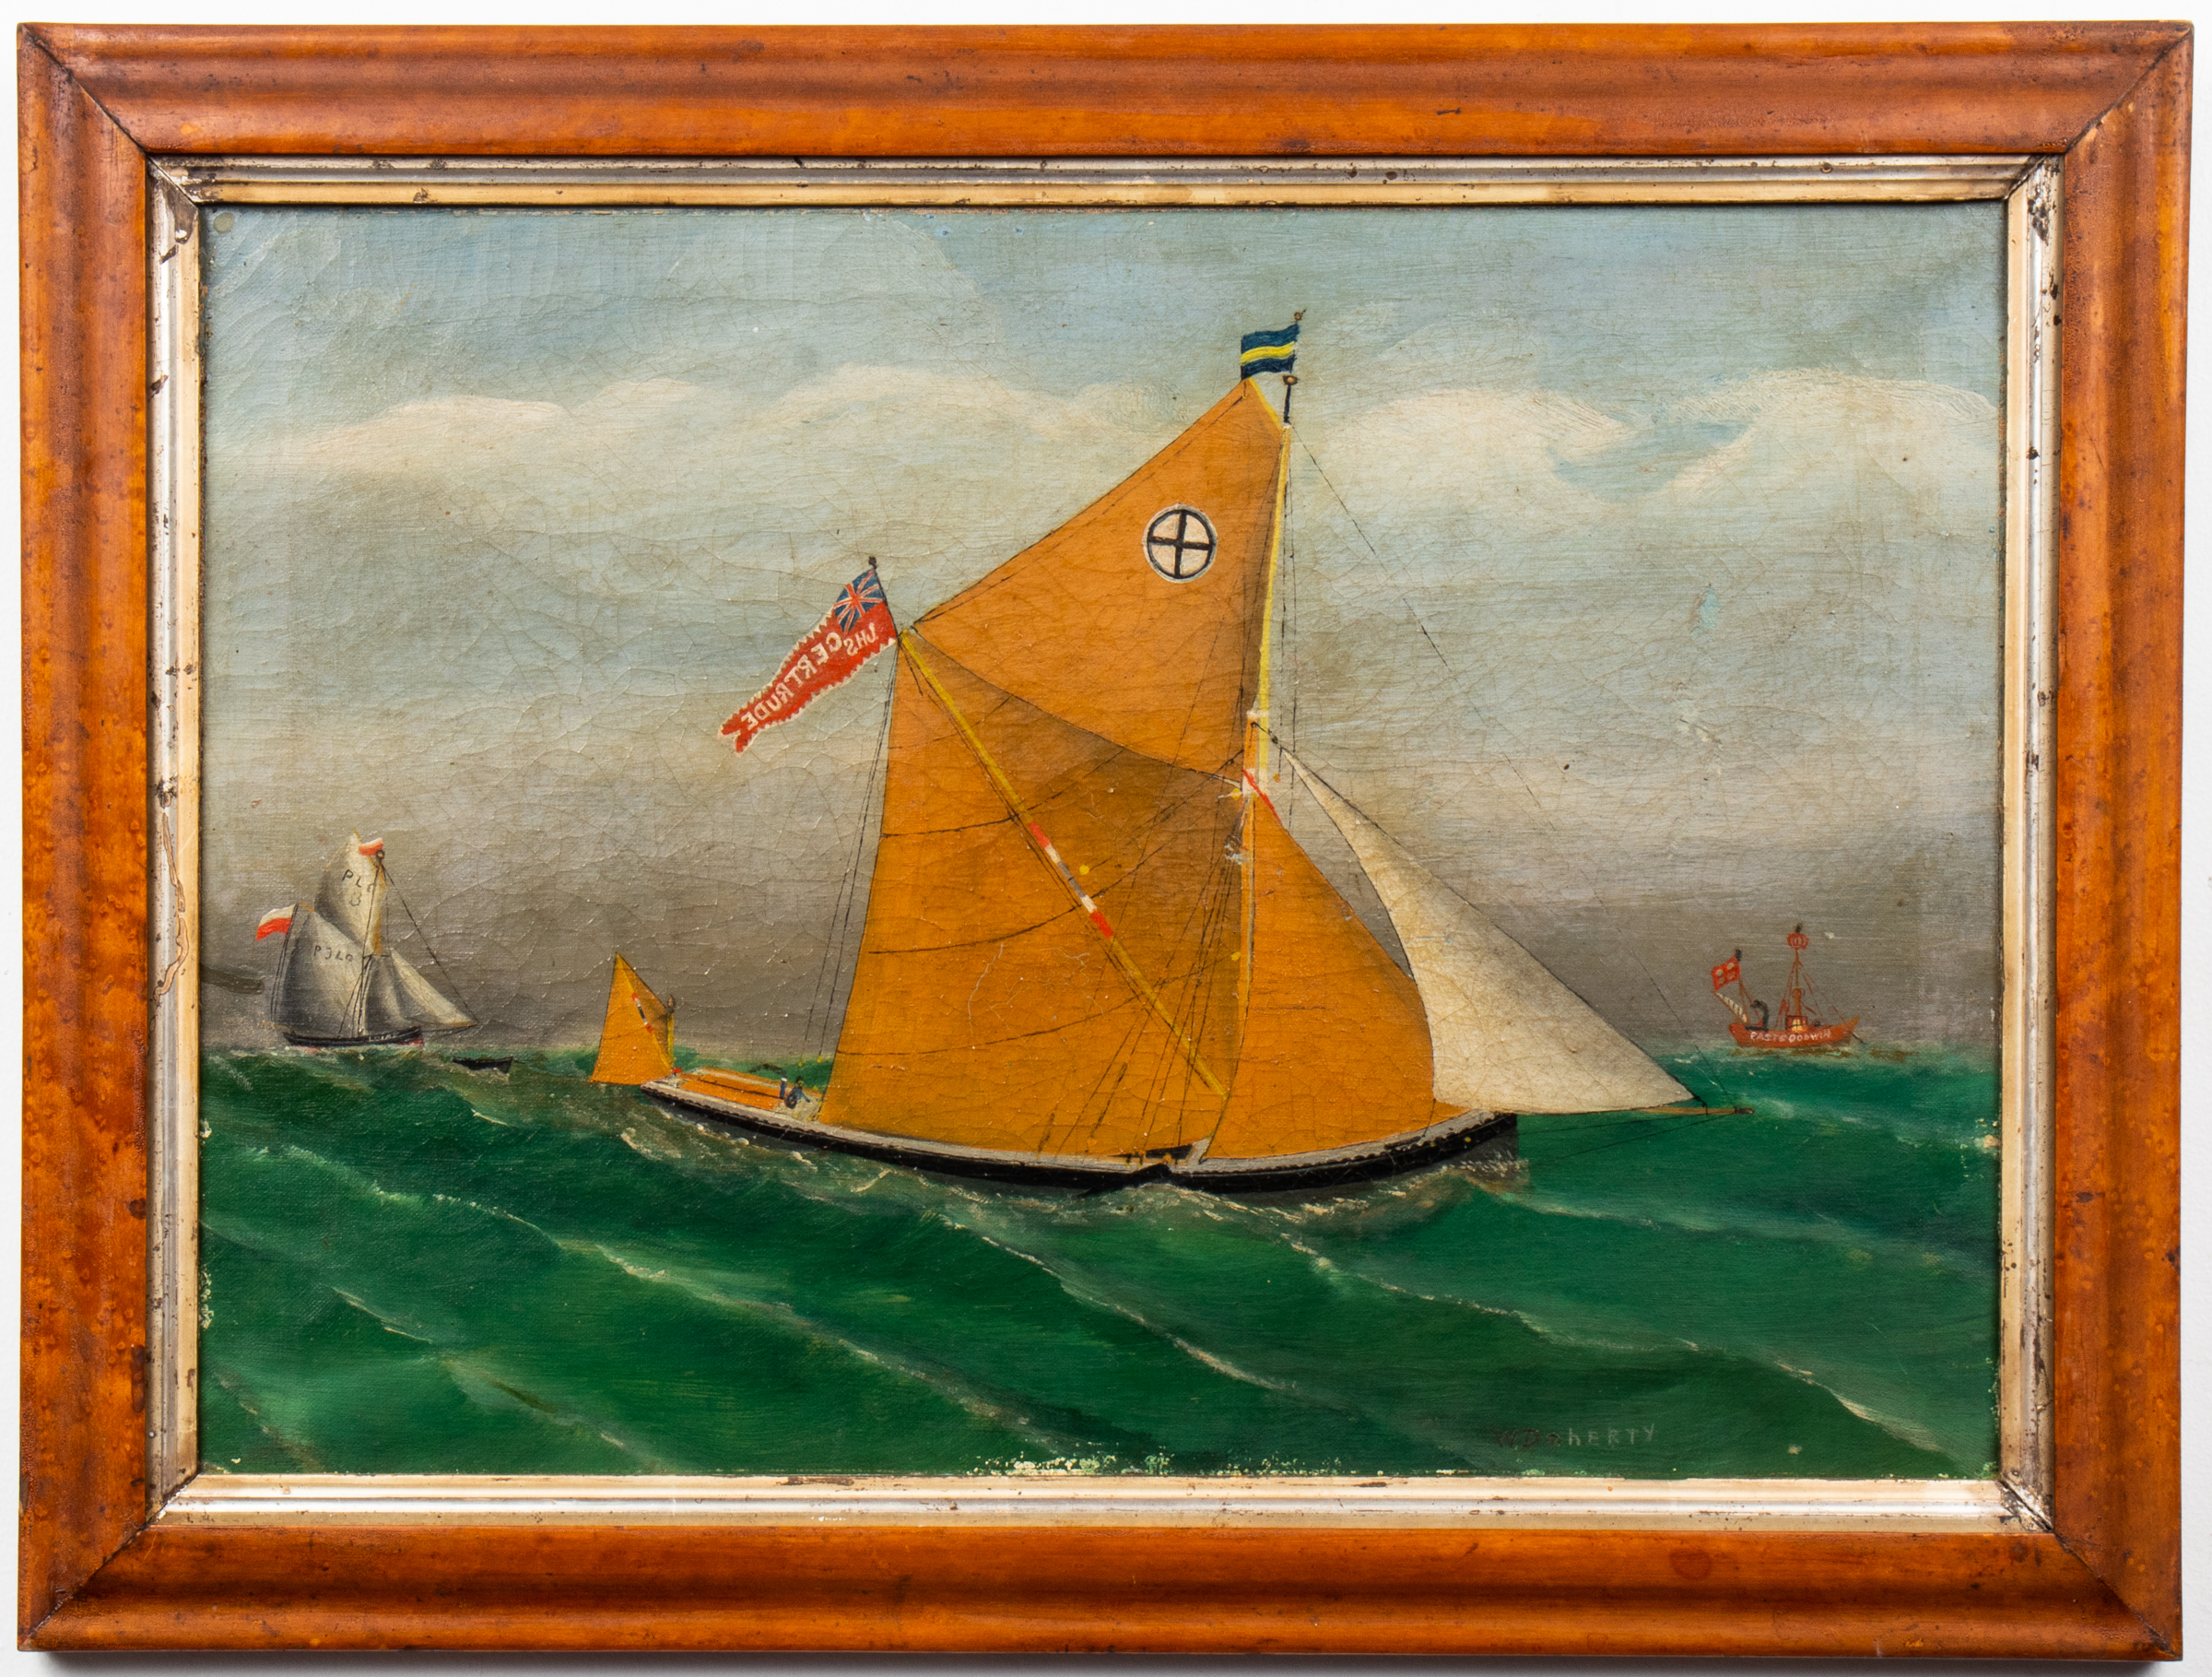 W. DOHERTY "SAILBOATS" OIL ON CANVAS,